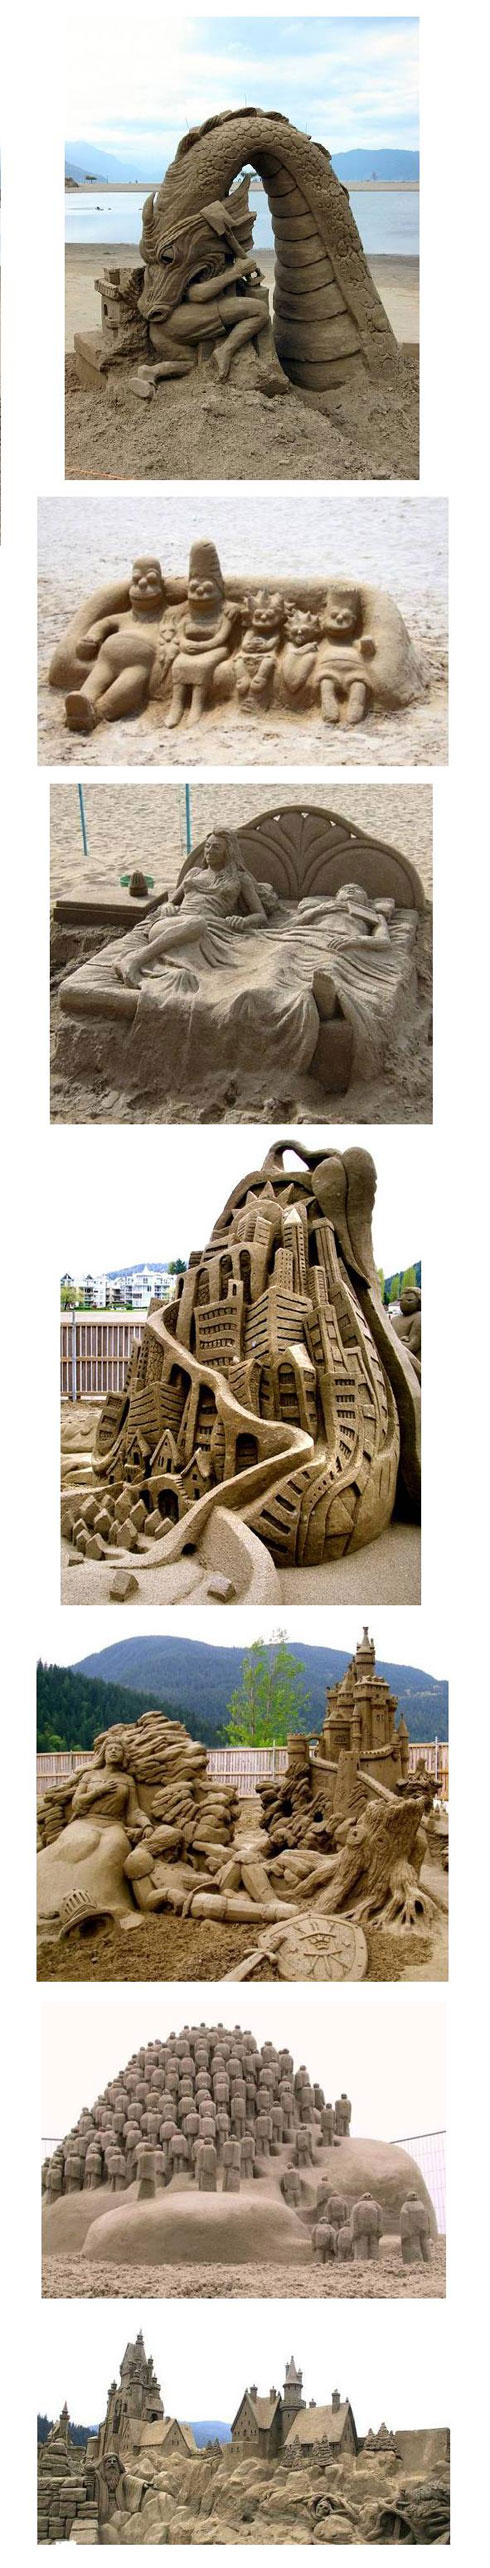 A collection of some the most incredible sand sculptures you'll ever see. Taken from a recent event in Canada. 